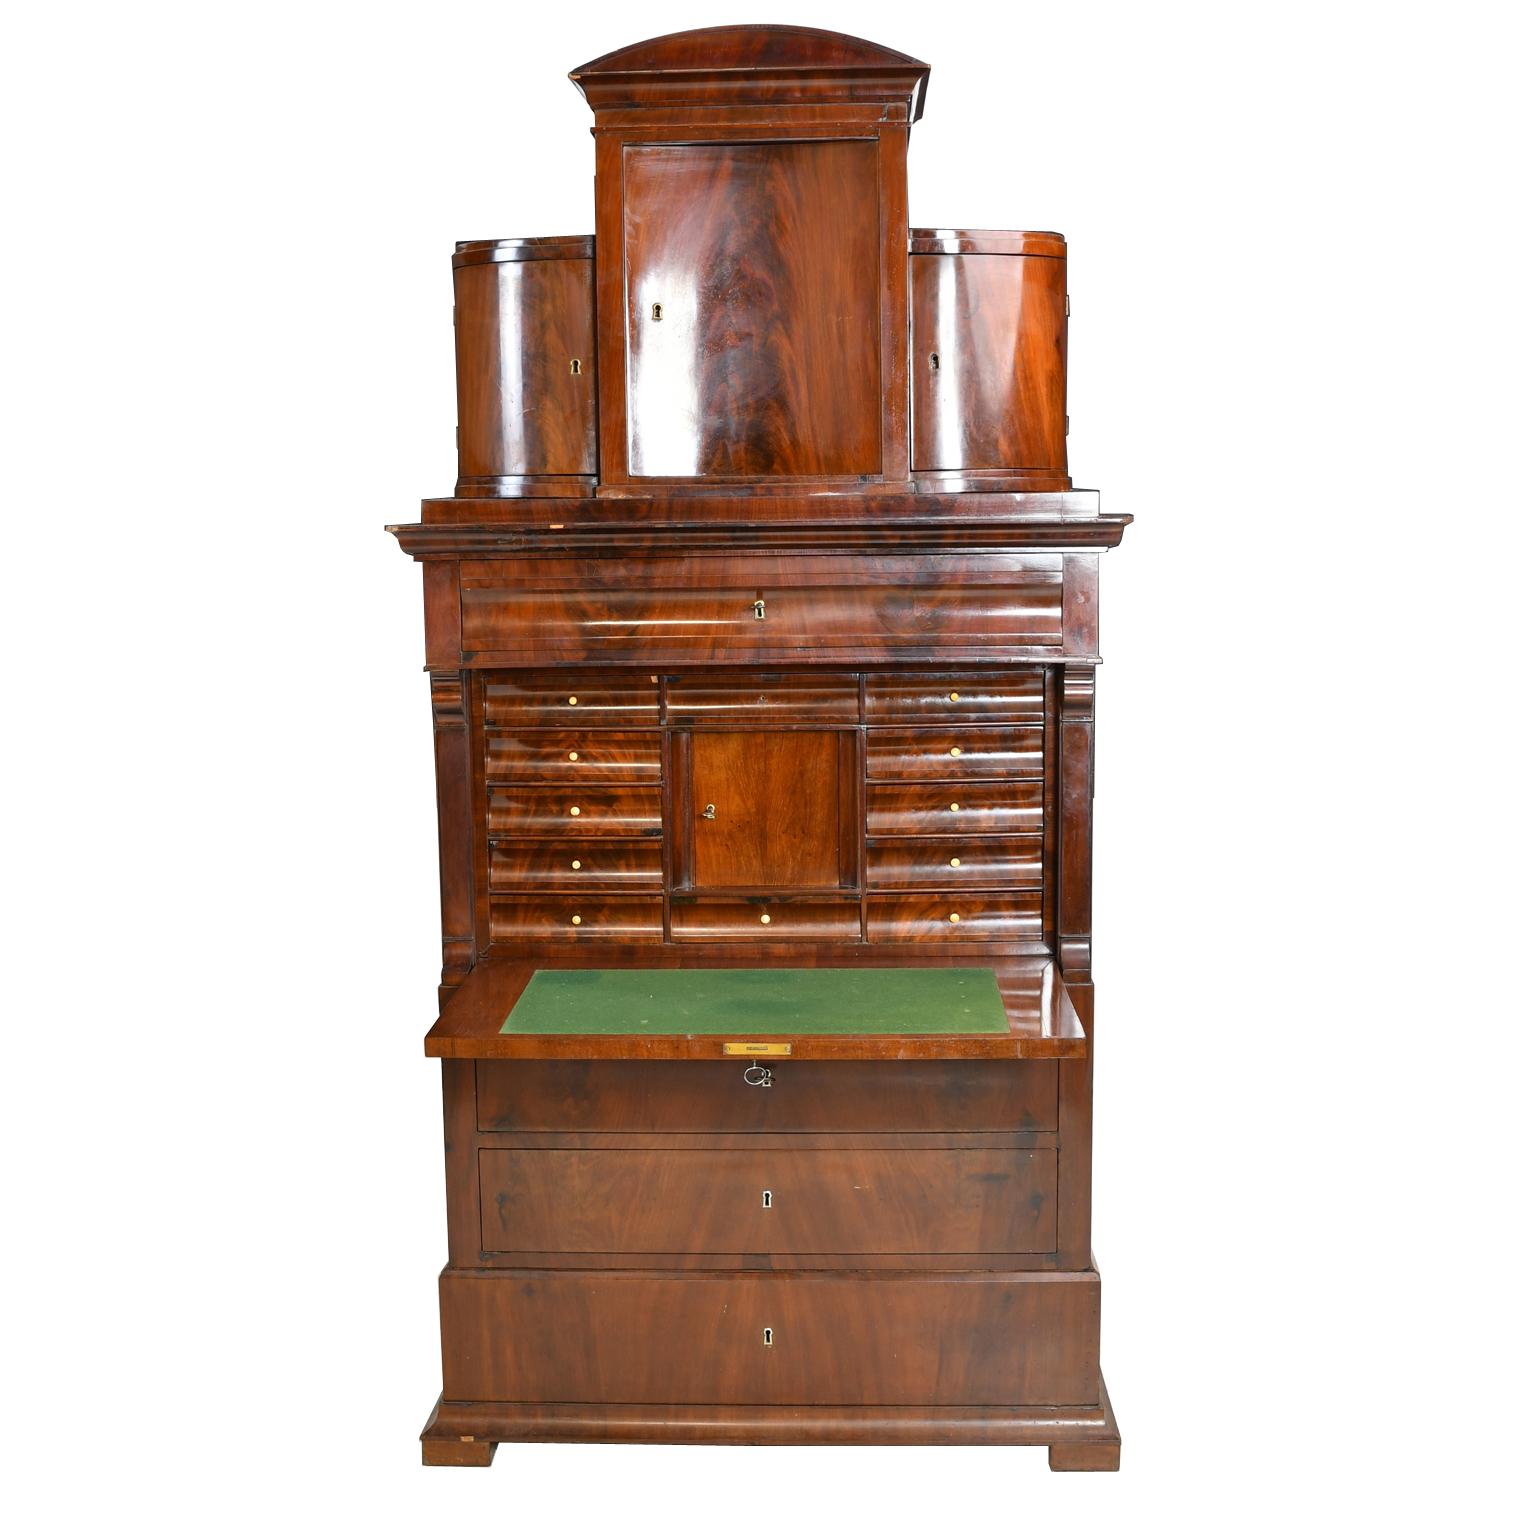 Classic Northern Europe Biedermeier fall front secretary over a flight of drawers with original pediment top.
This Danish secretary fabricated in Copenhagen, c. 1820 has 4 full drawers a fall front writing surface with ample work space, a flight of